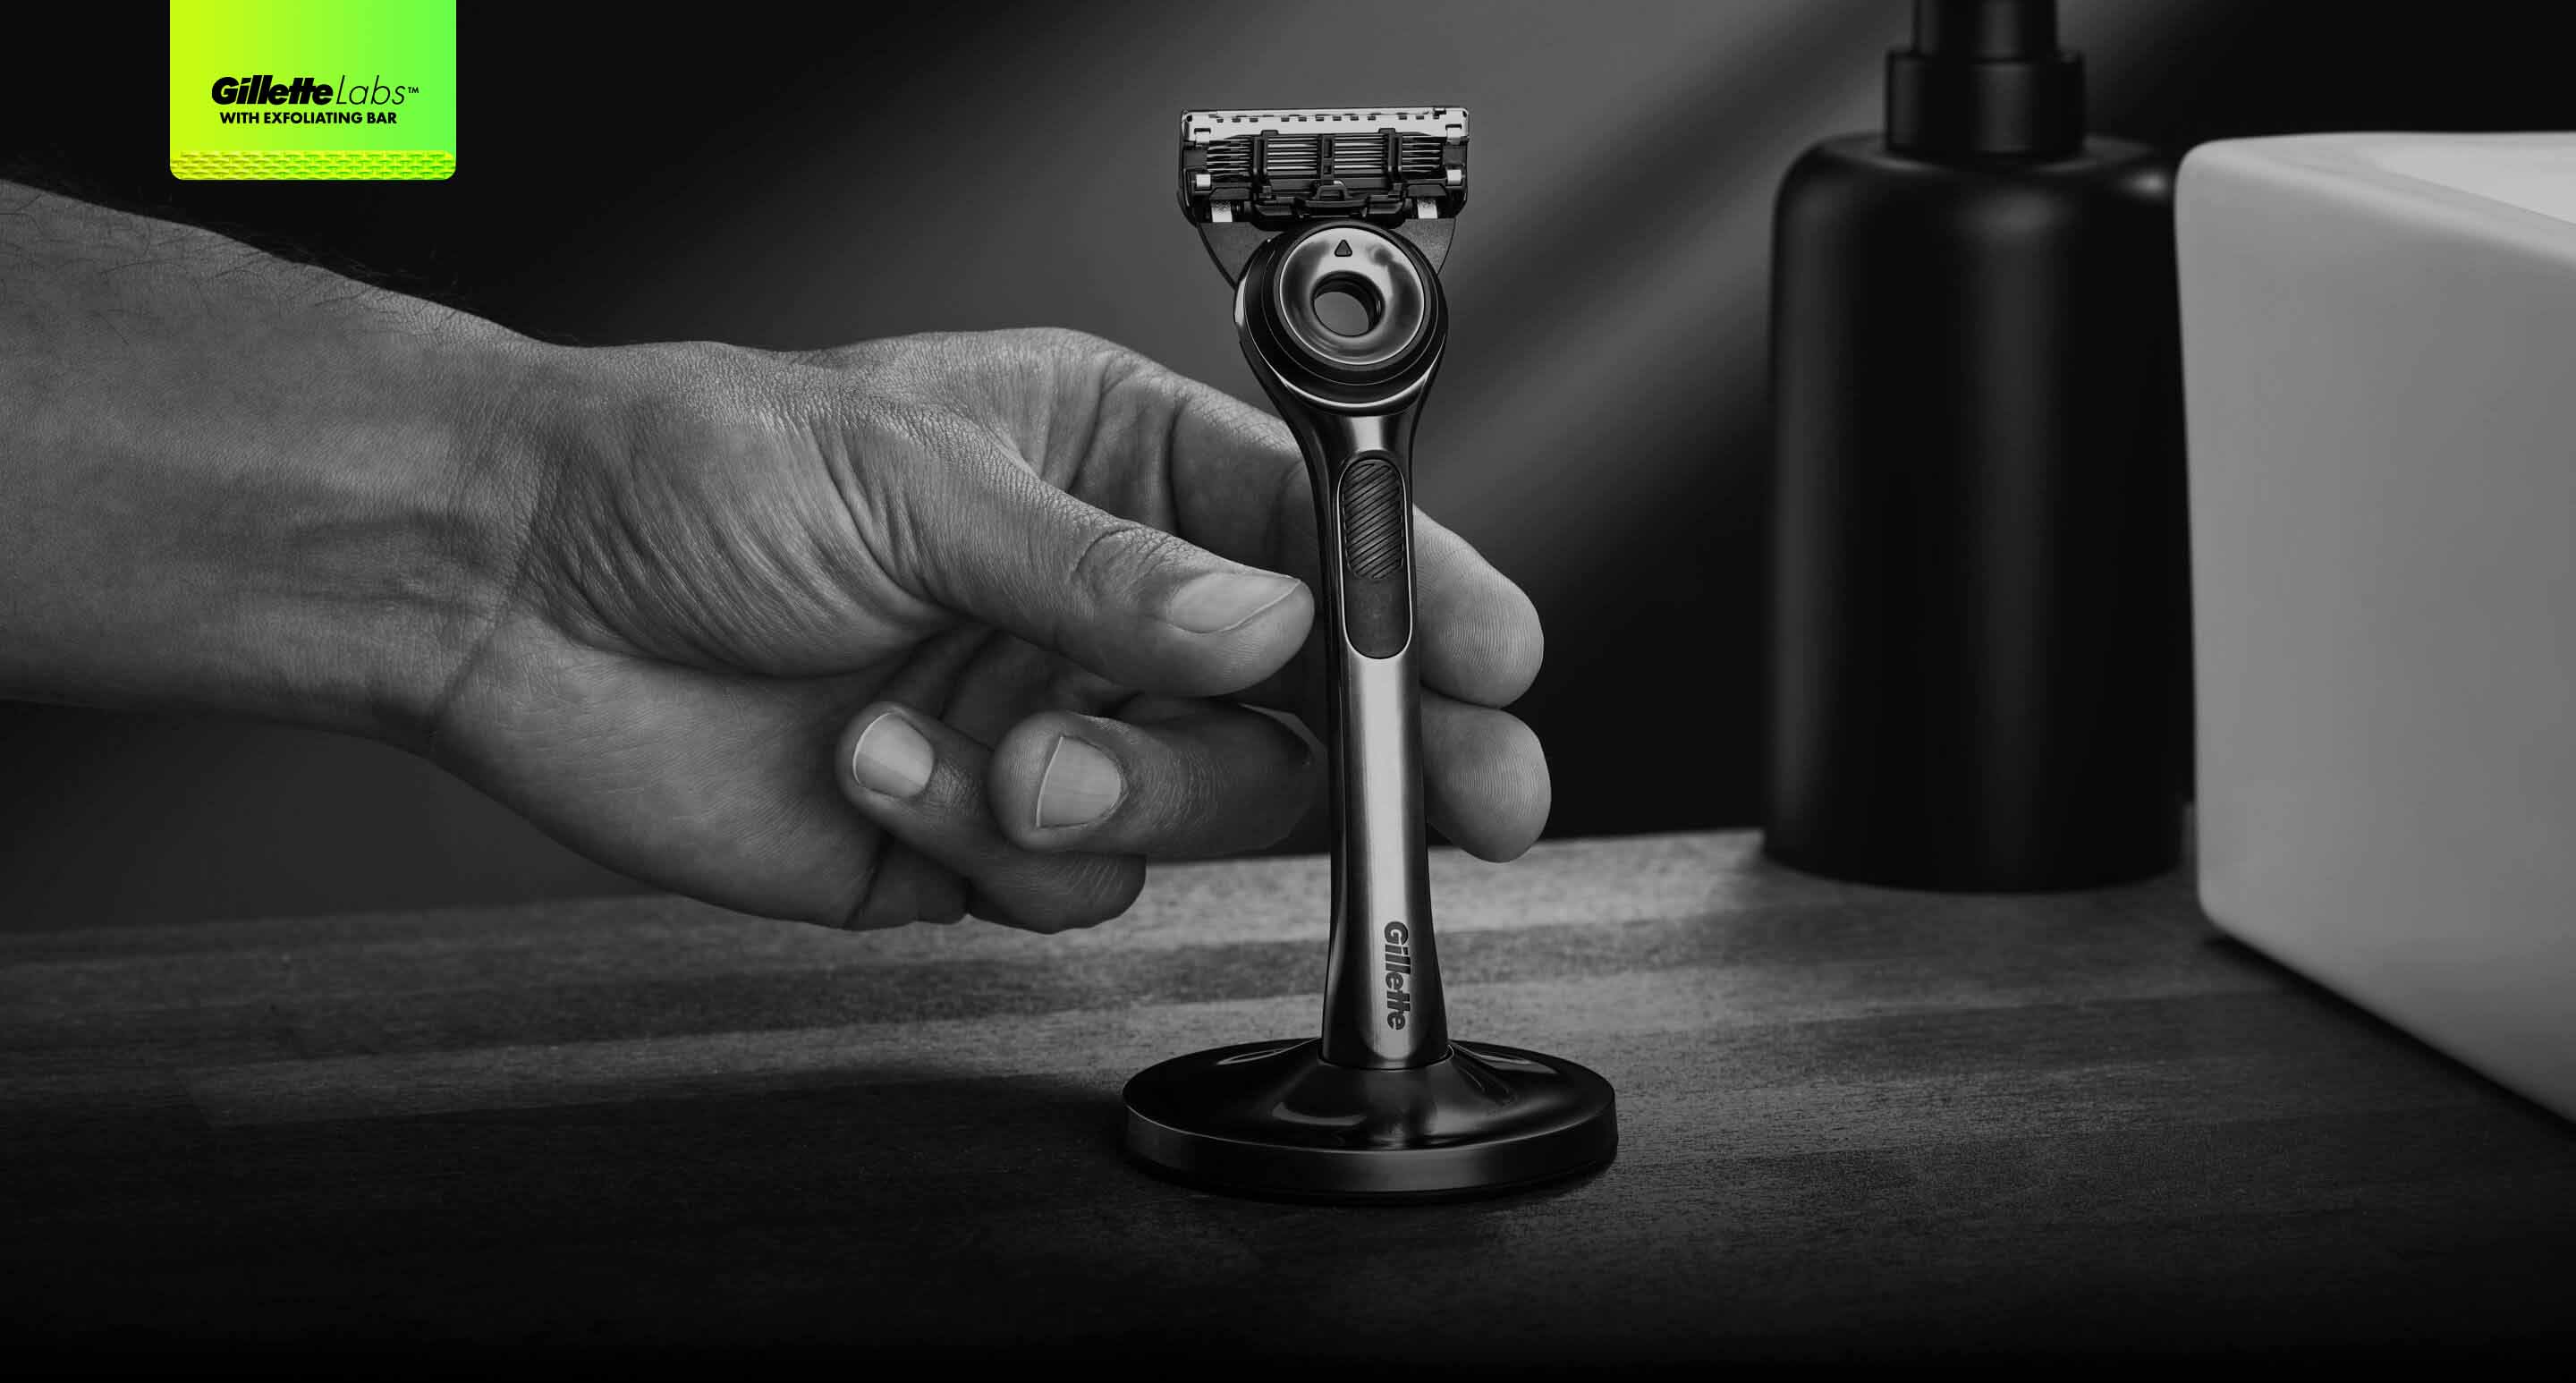 Grayscale image of a man's hand reaching for an upright razor.